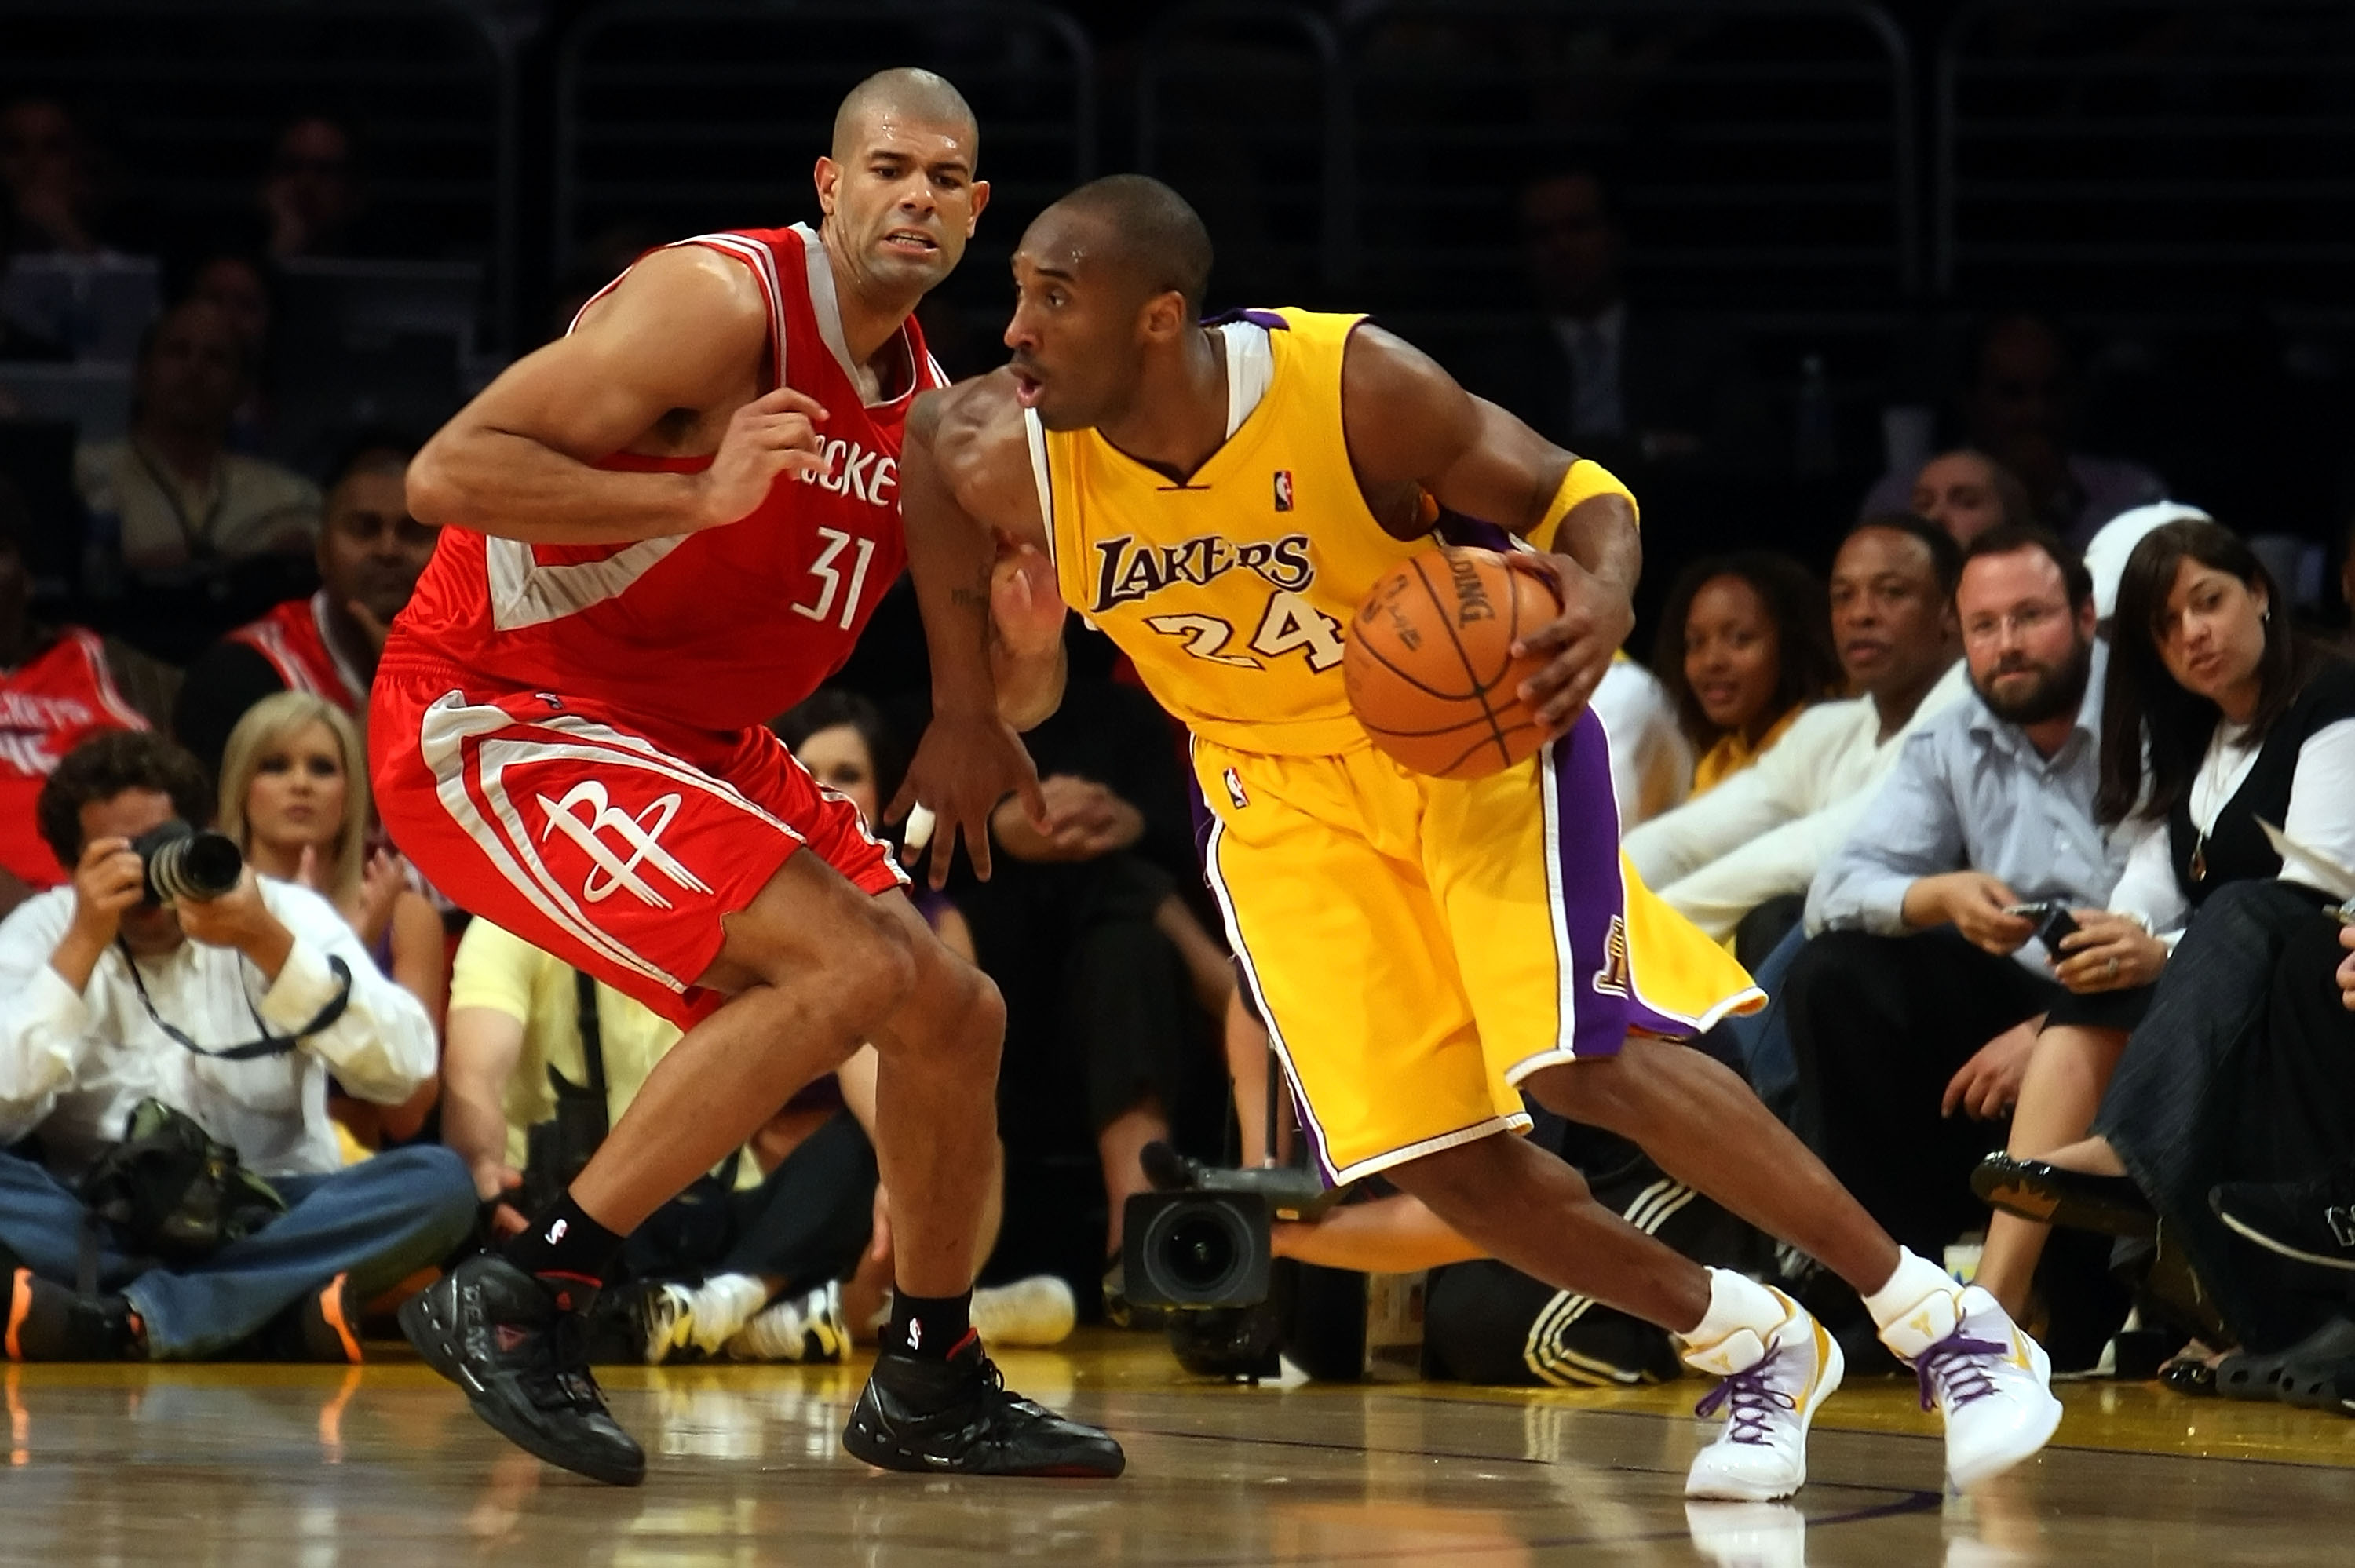 Los Angeles Lakers legend Kobe Bryant drives on Houston Rockets forward during the 2009 NBA Playoffs